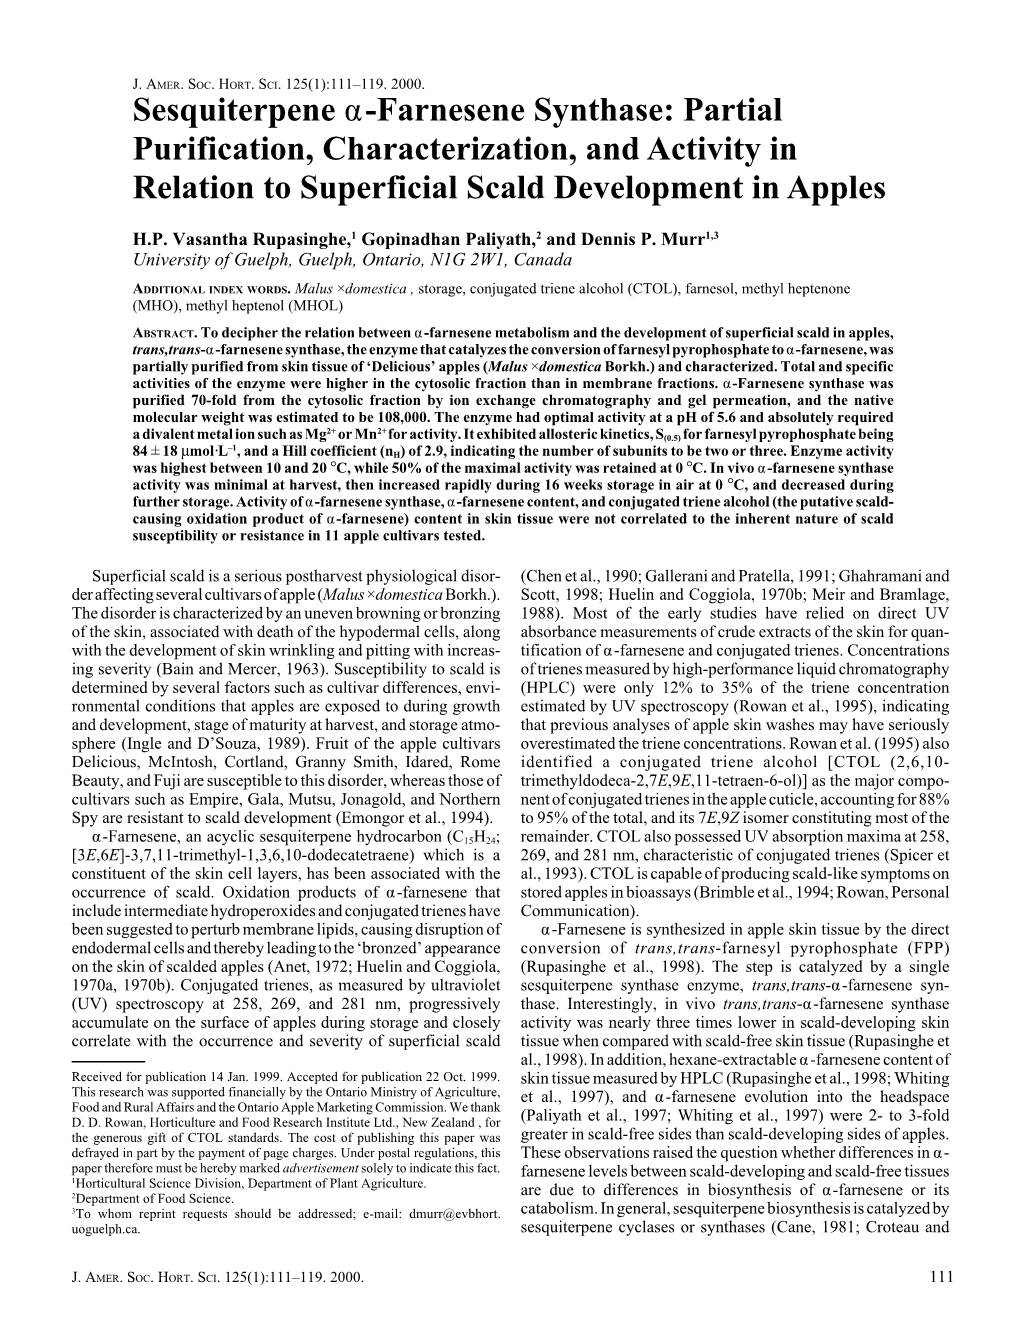 Sesquiterpene Α-Farnesene Synthase: Partial Purification, Characterization, and Activity in Relation to Superficial Scald Development in Apples